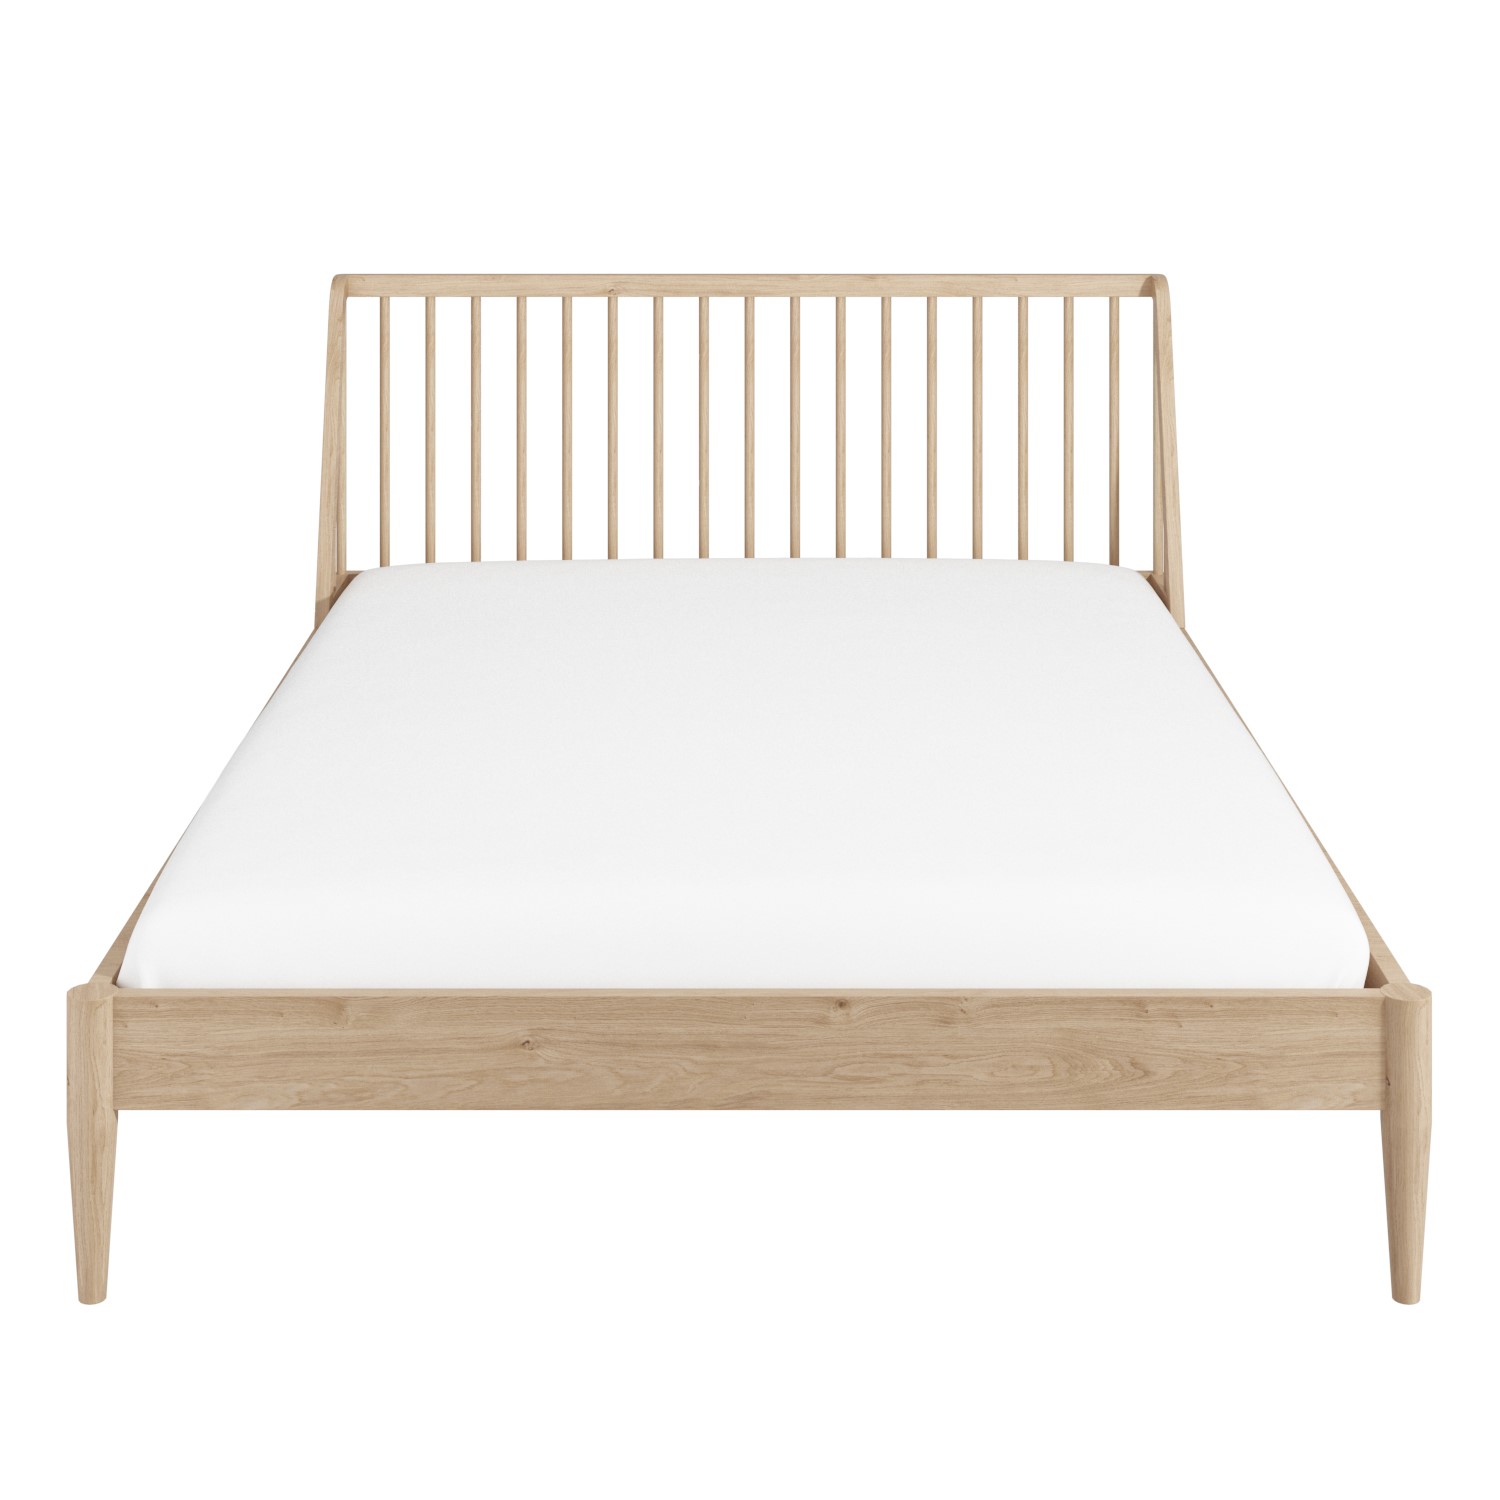 Read more about Wooden spindle mid century double bed frame saskia